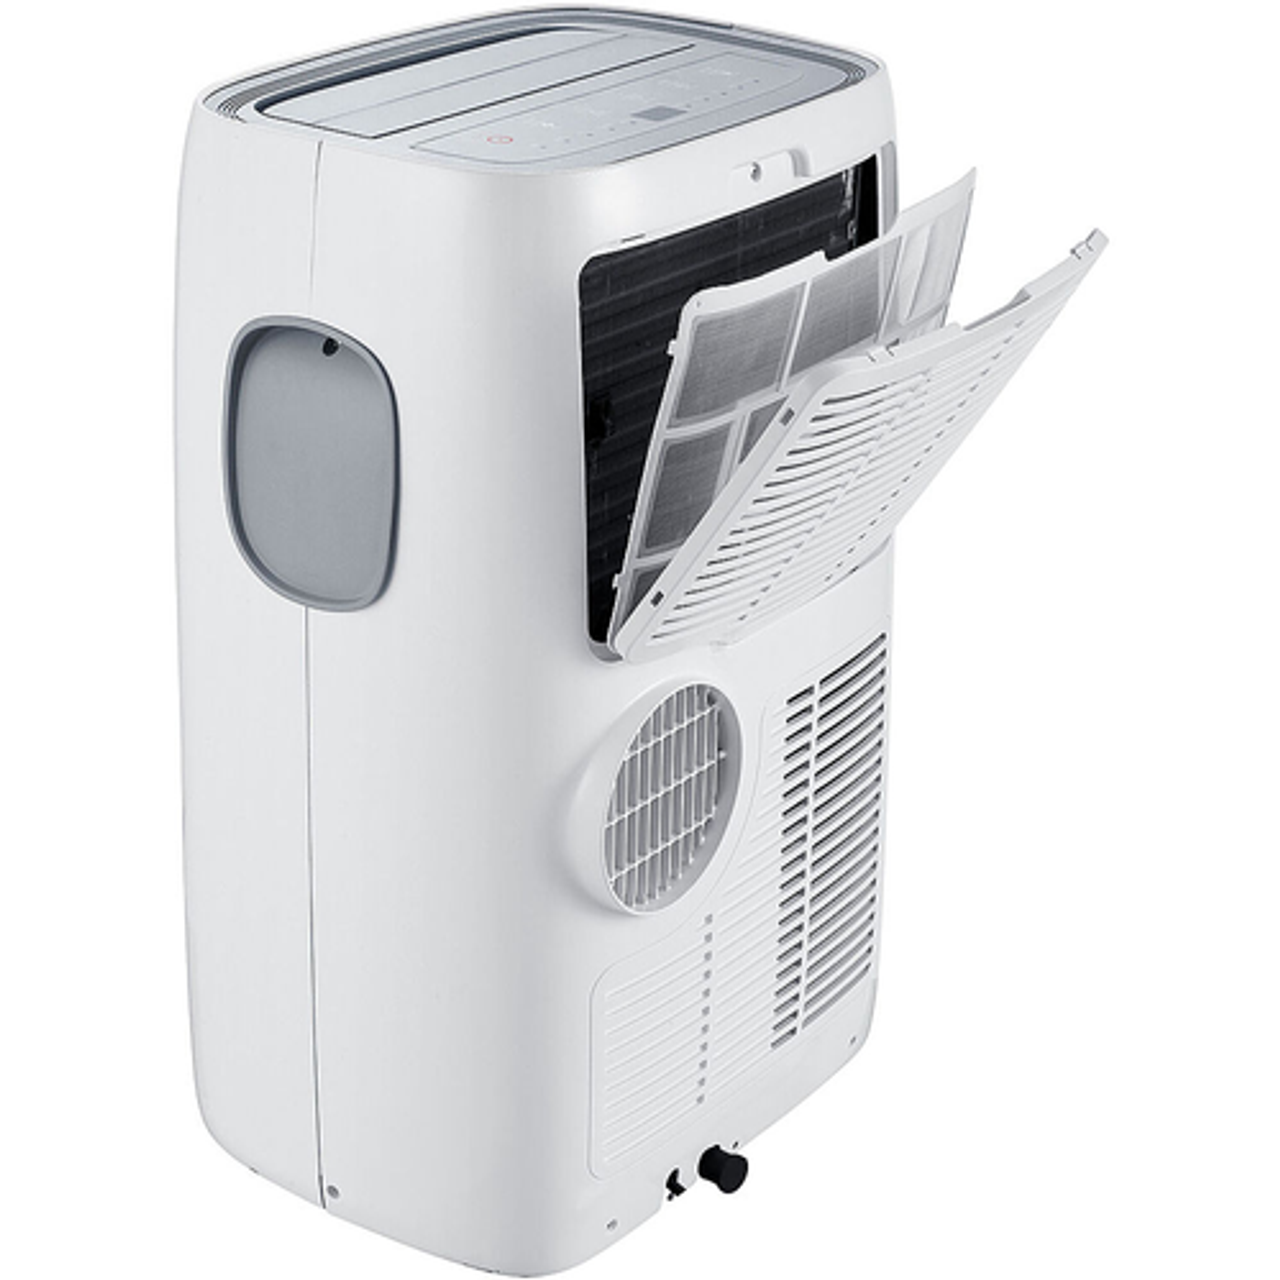 Arctic Wind - 13,000 BTU Portable Air Conditioner with Heat Pump | for Rooms up to 400 Sq.Ft. | Remote Control | 24 Hour Timer - White